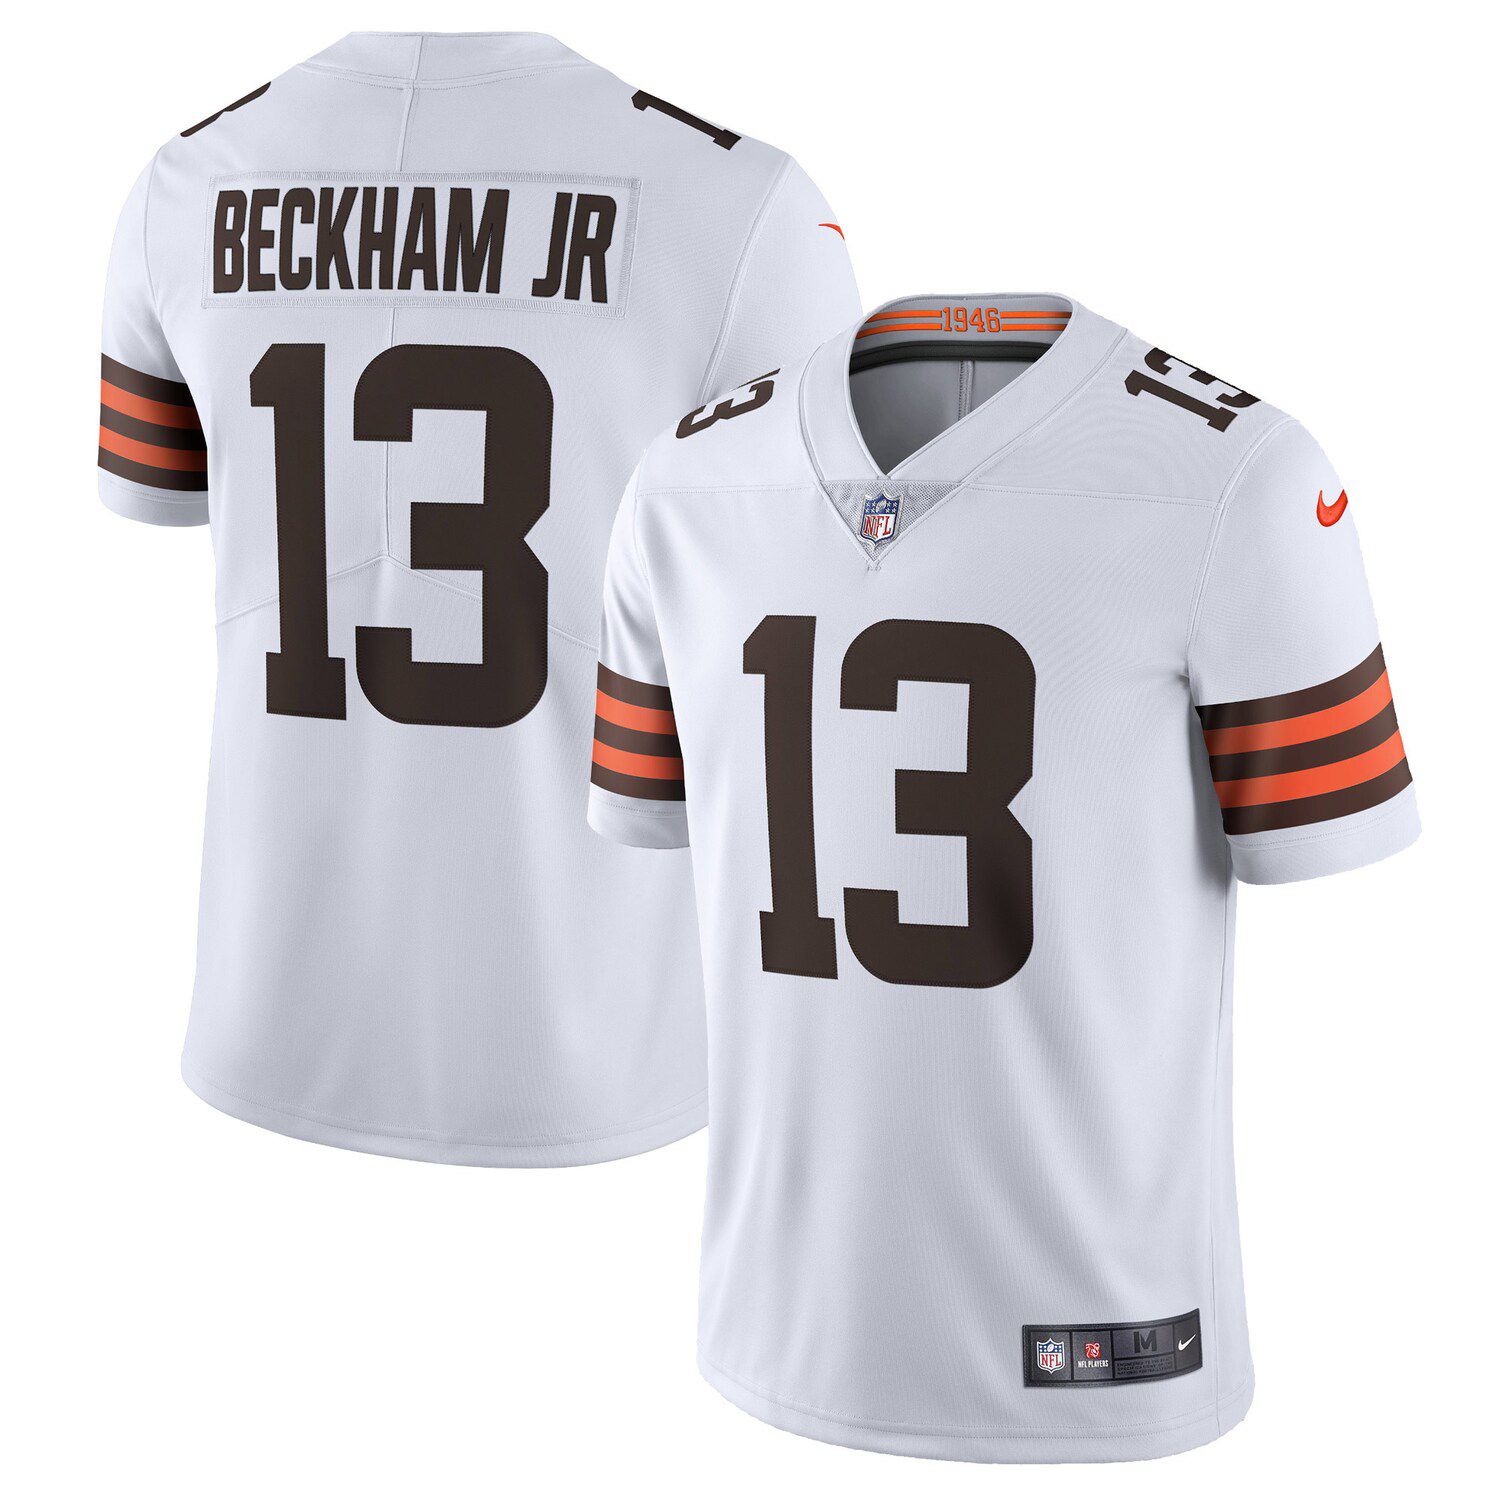 browns white jersey